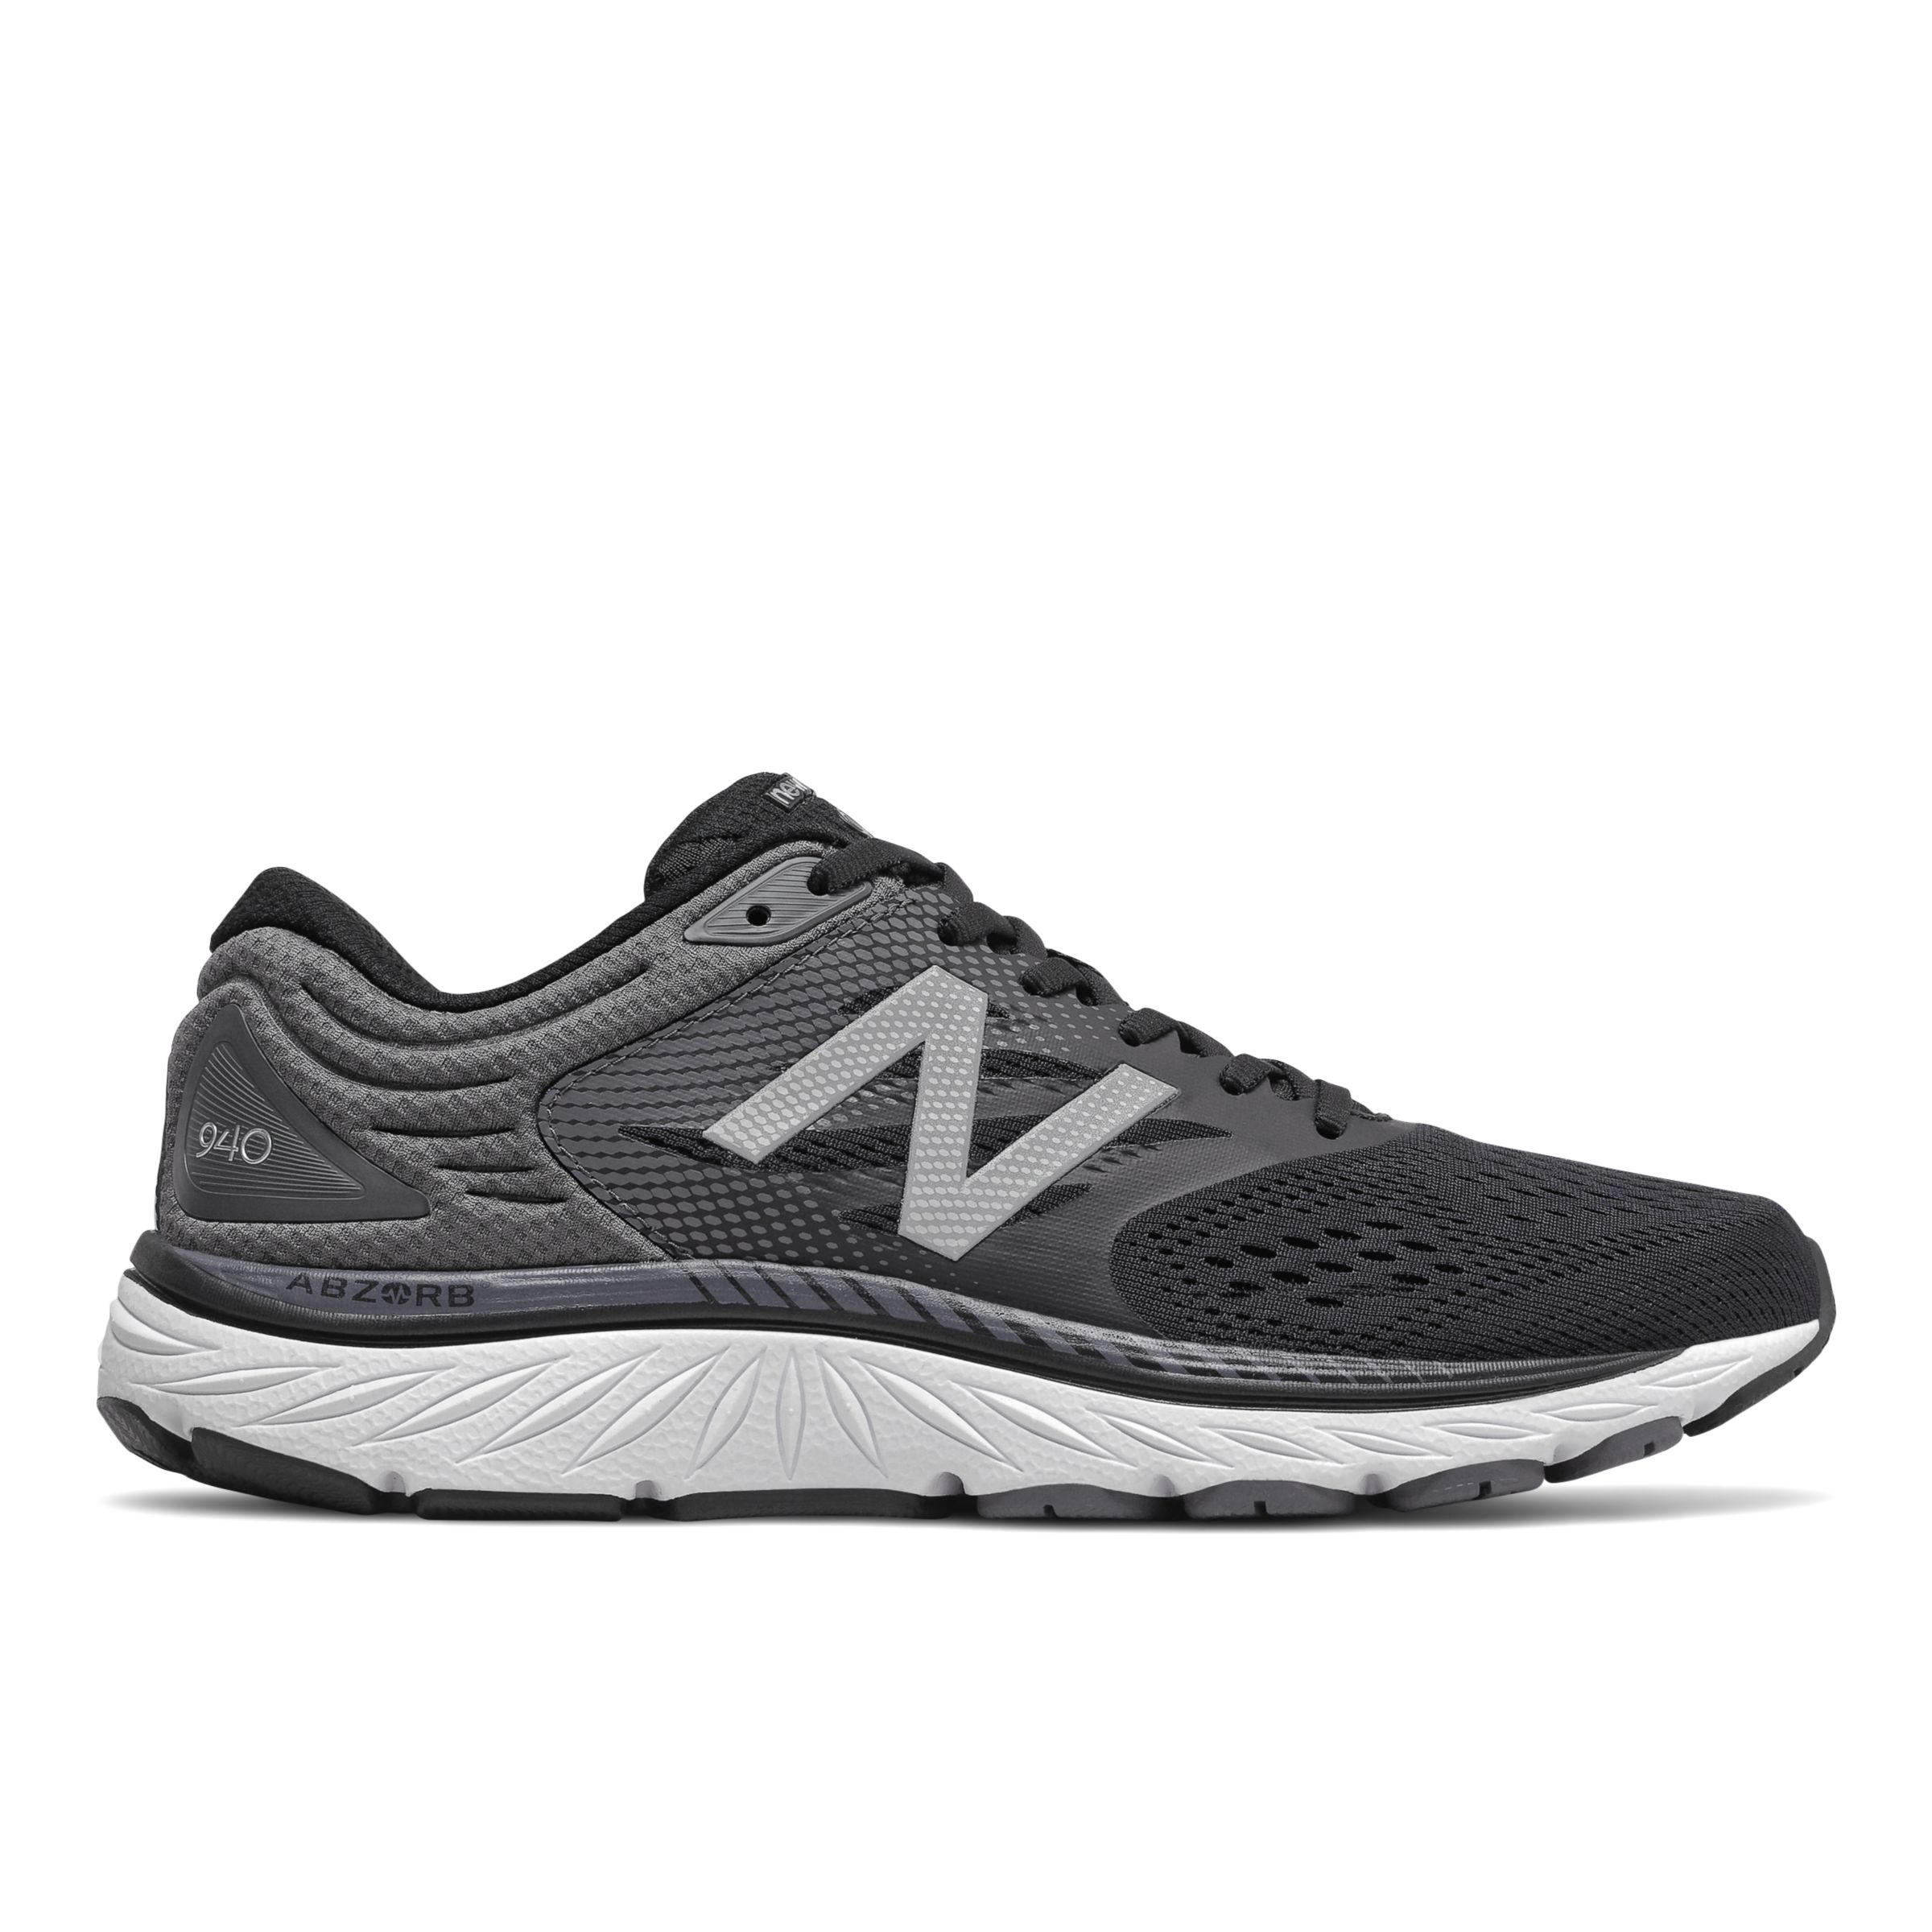 nb stability shoes